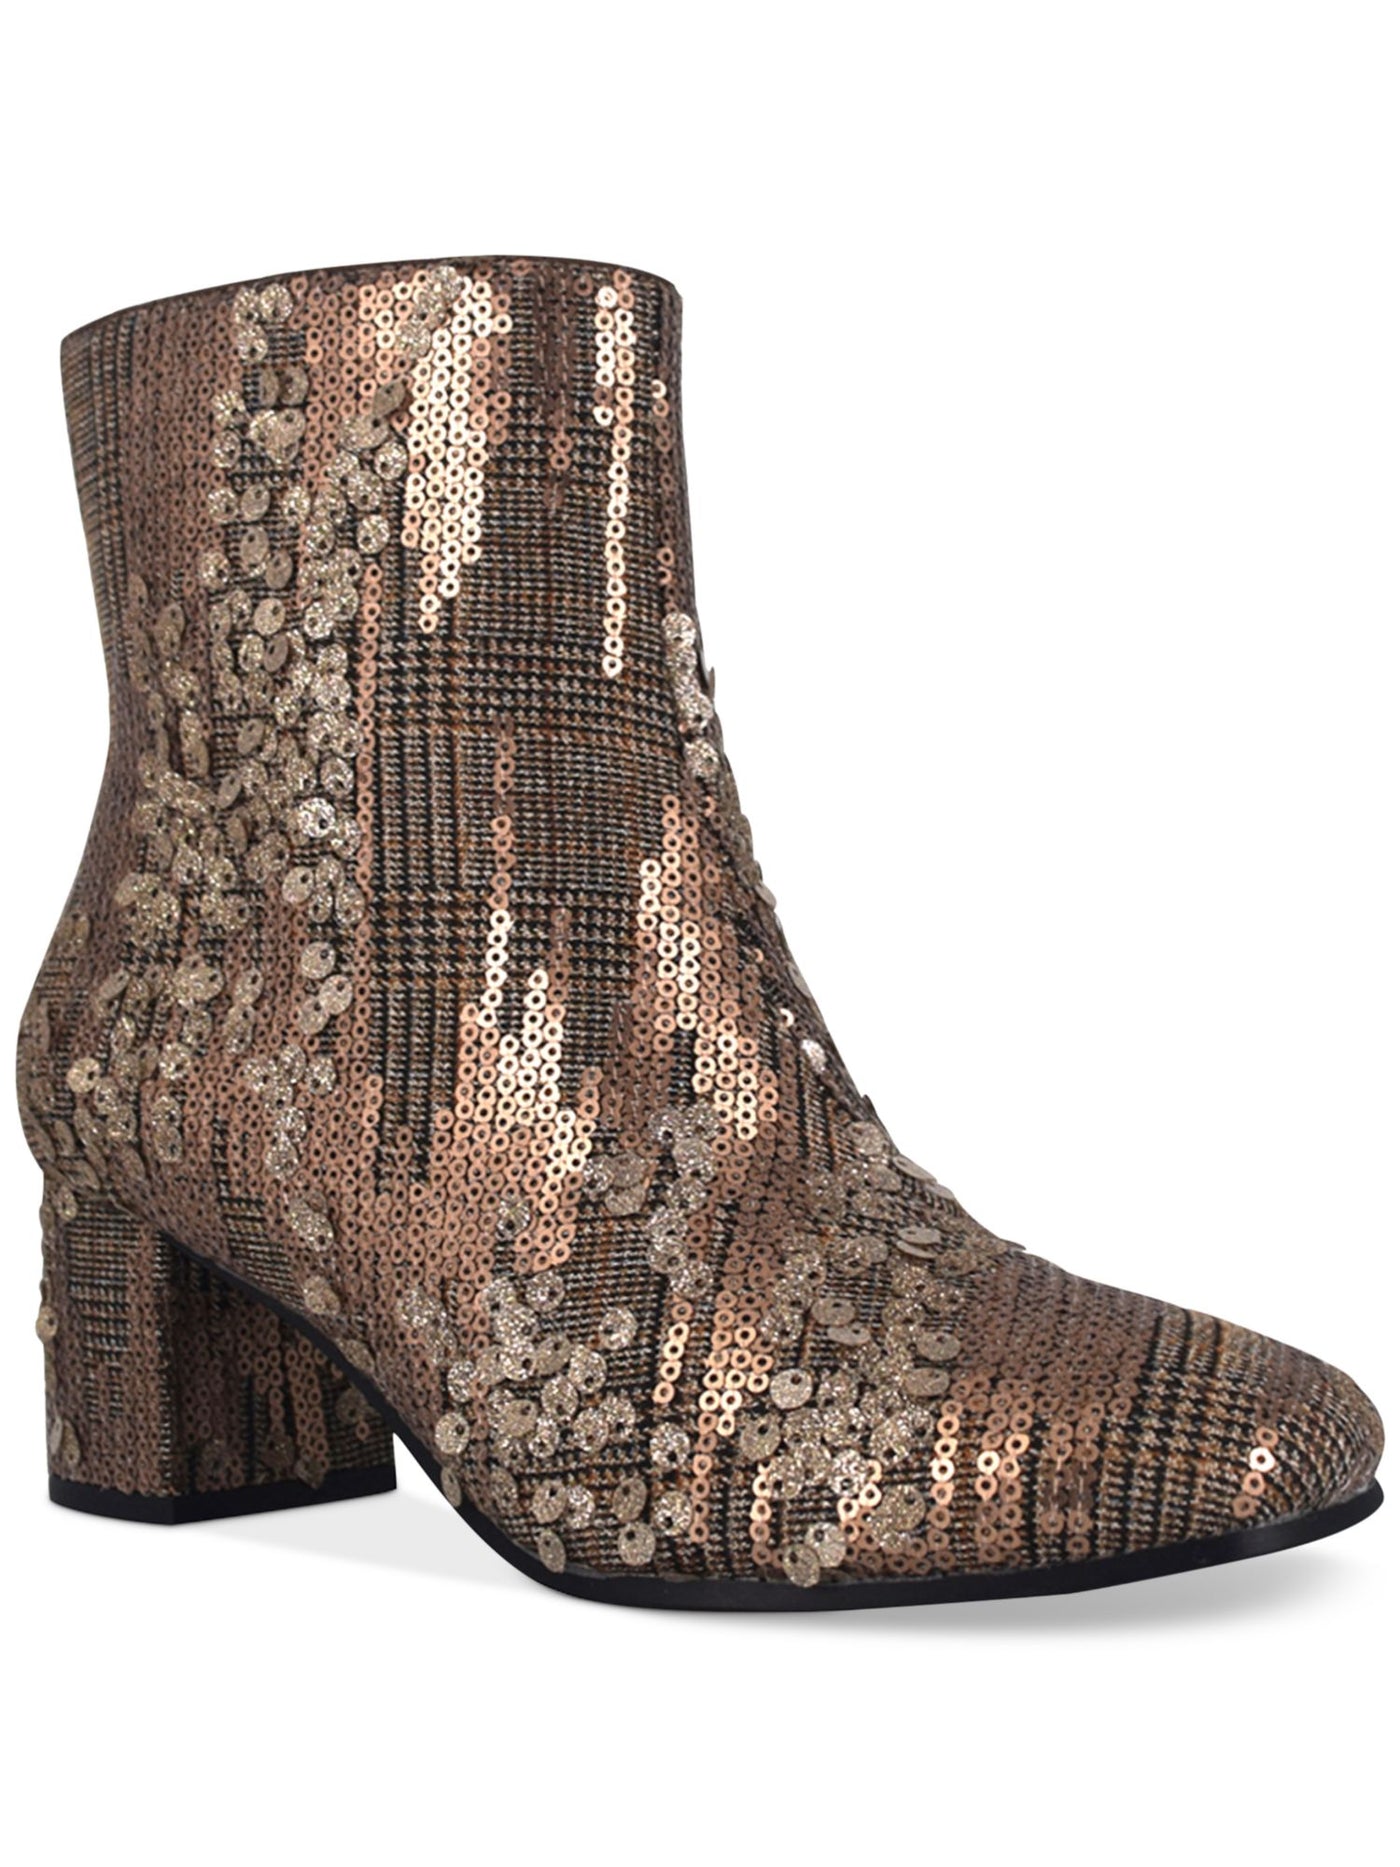 IMPO Womens Brown Sequined Cushioned Round Toe Block Heel Zip-Up Dress Booties 6.5